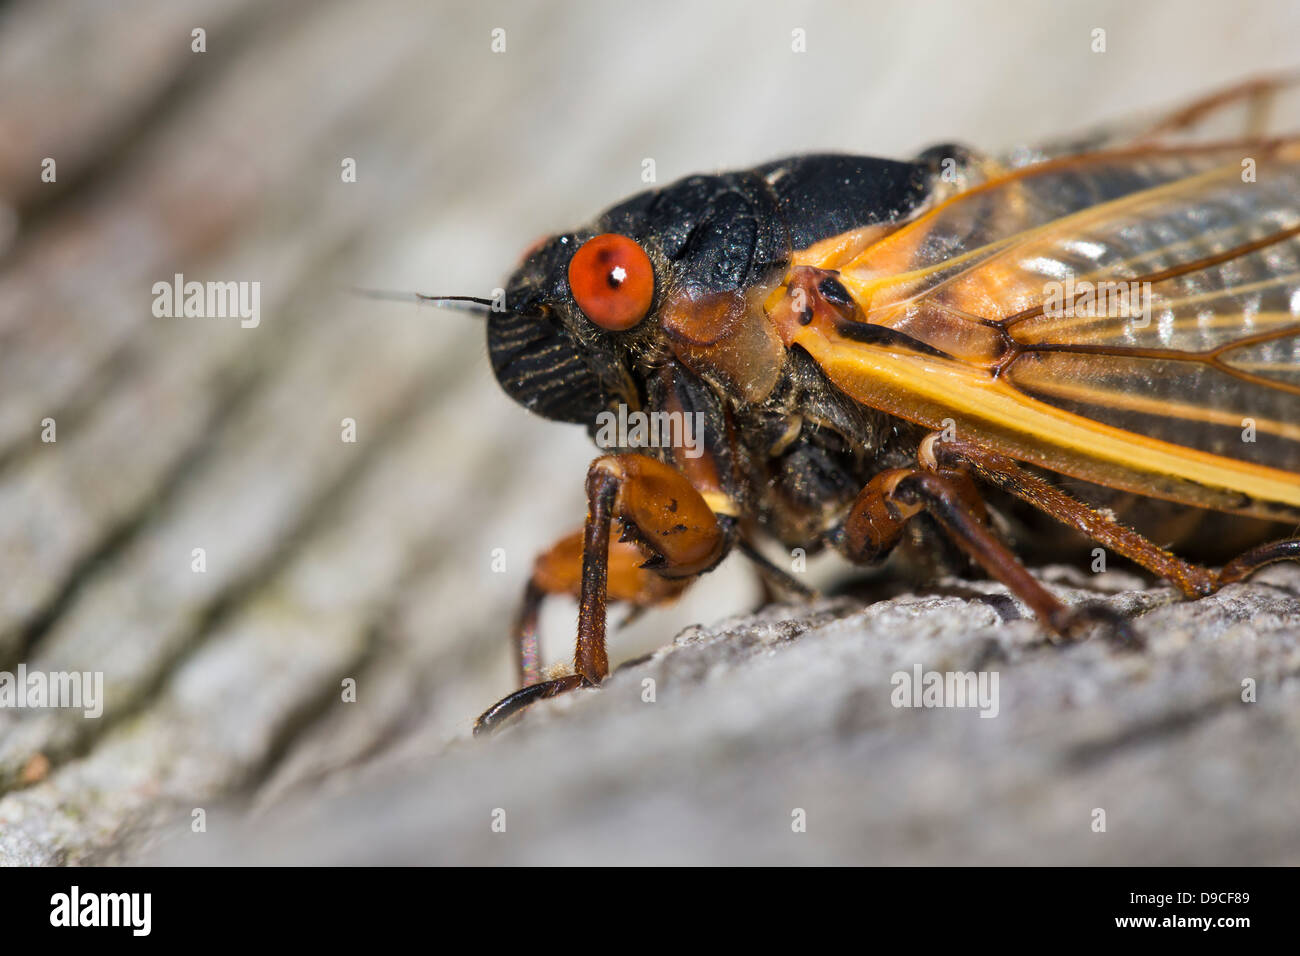 Close-up of Periodical Cicada (Magicicada sp.) also know as the 17-year Periodical Cicadas of eastern North America. Stock Photo